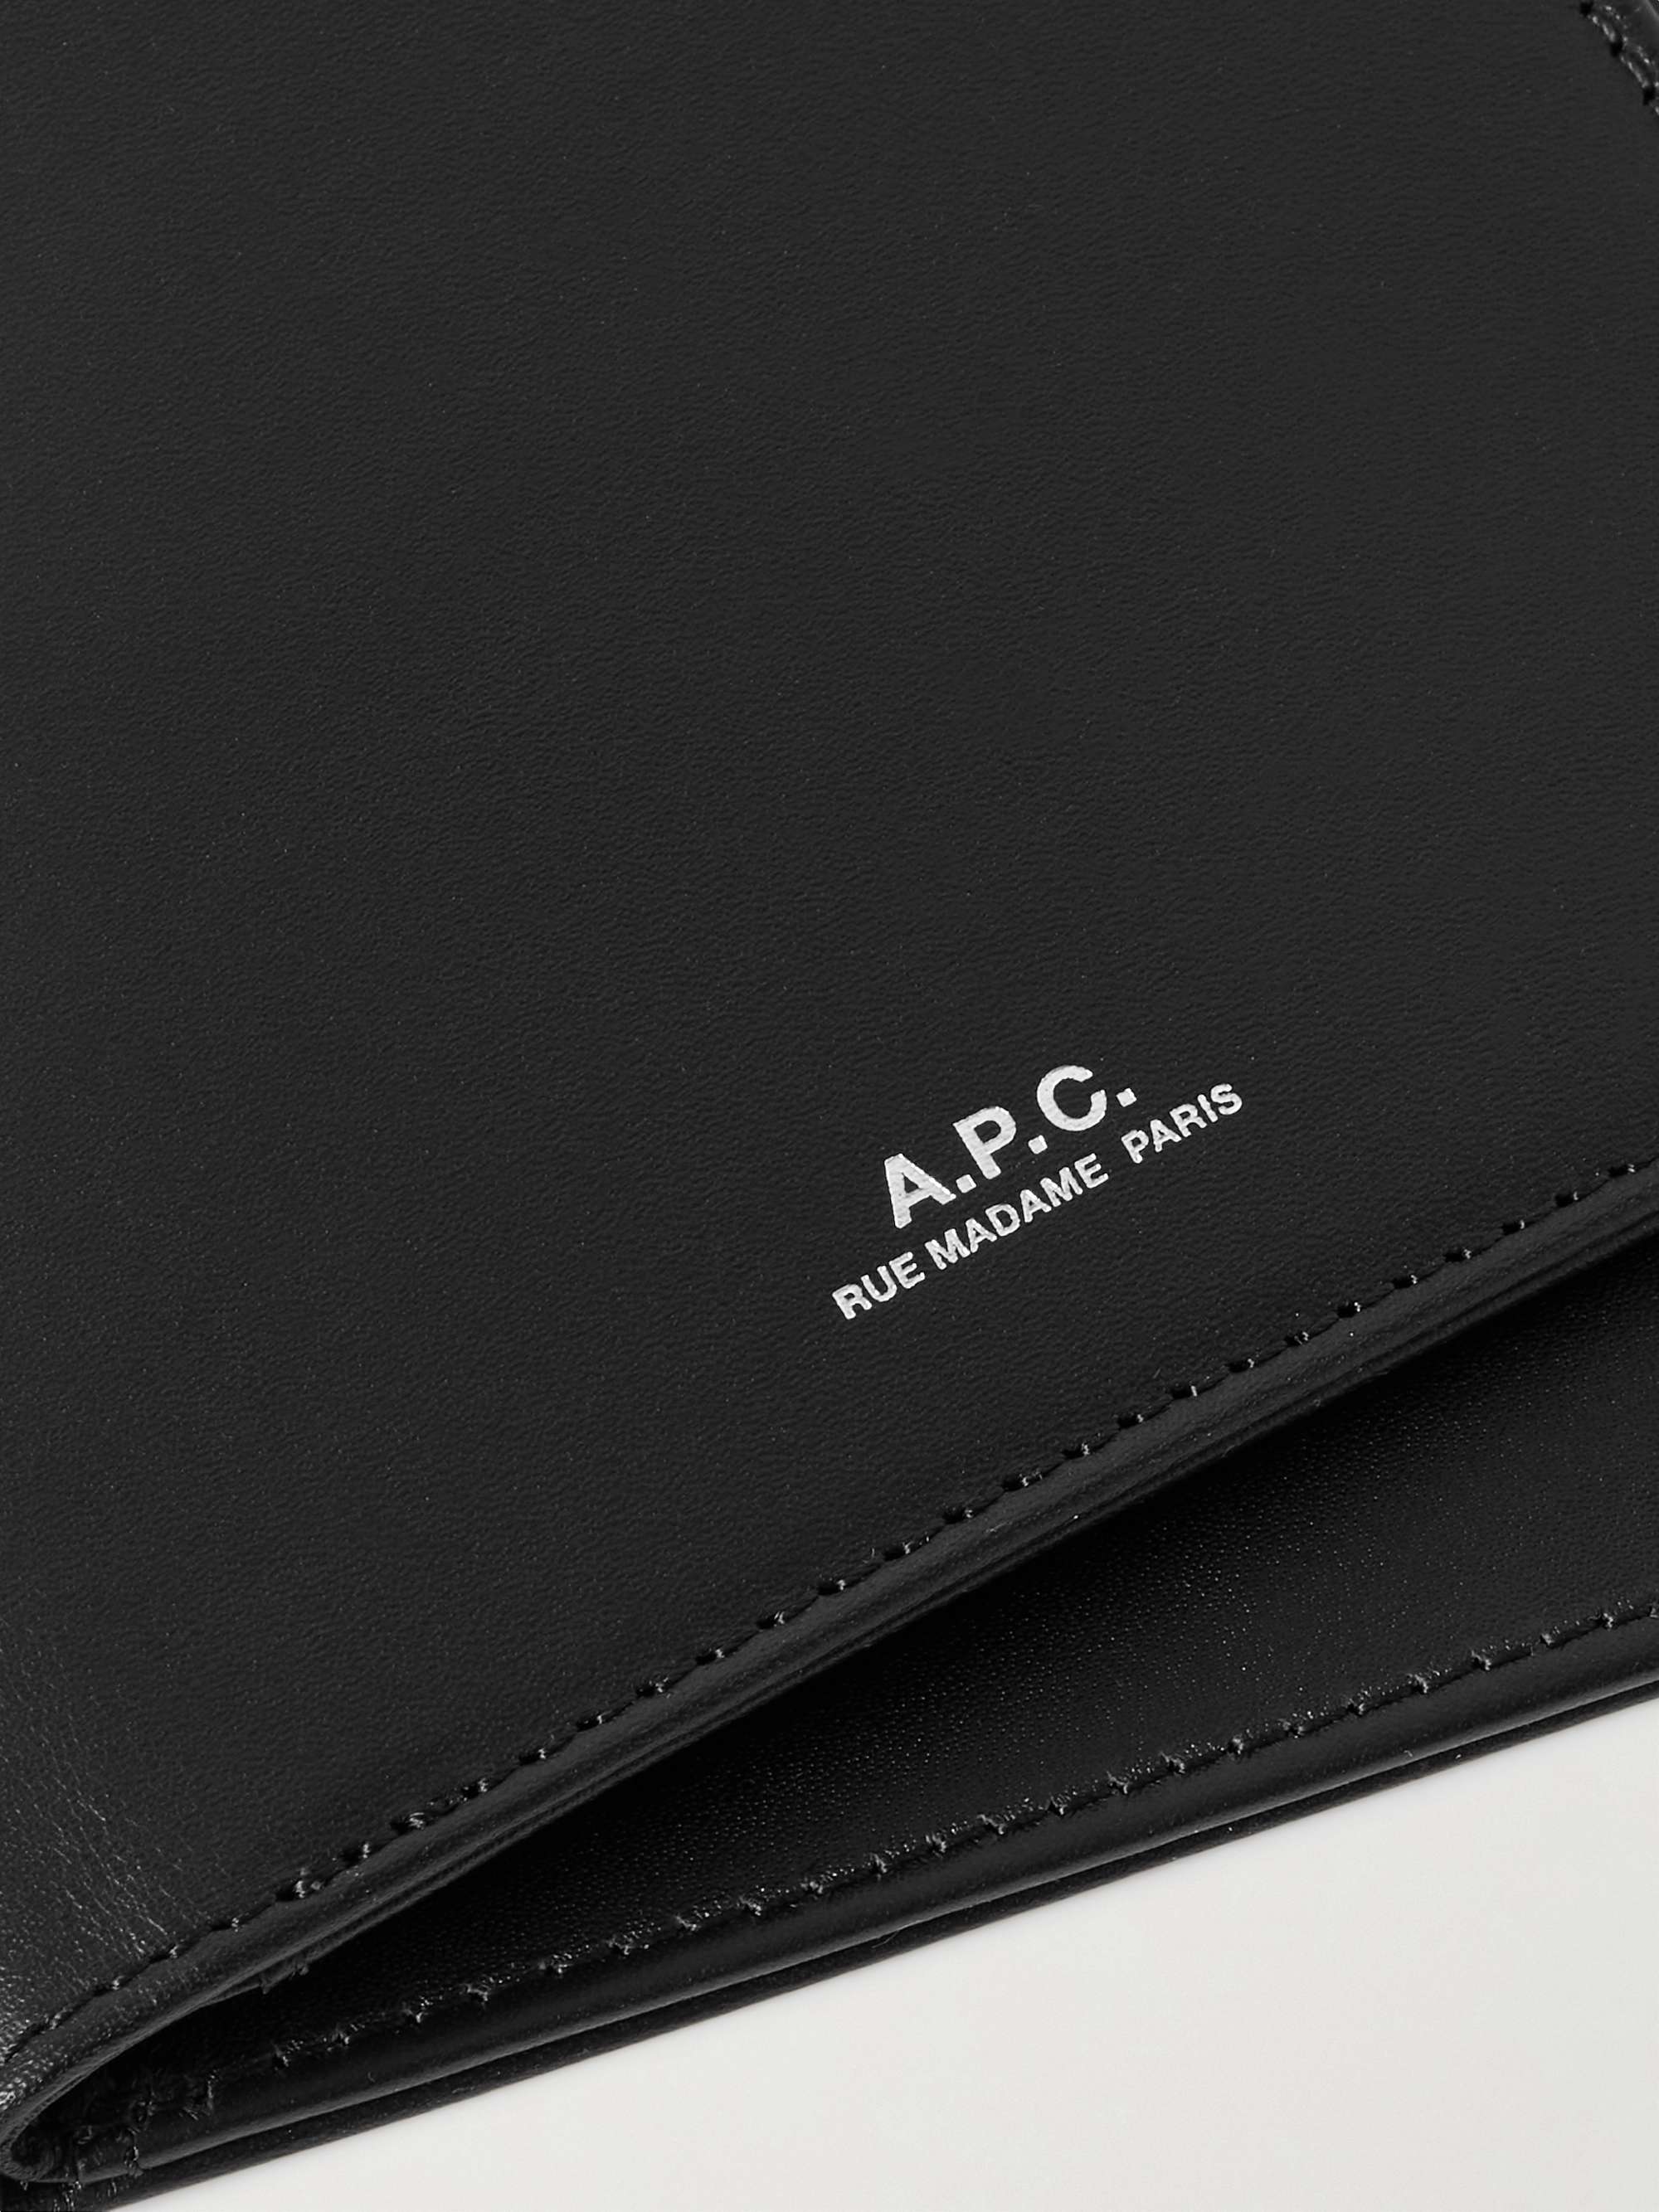 A.P.C. Aly Leather Billfold Wallet